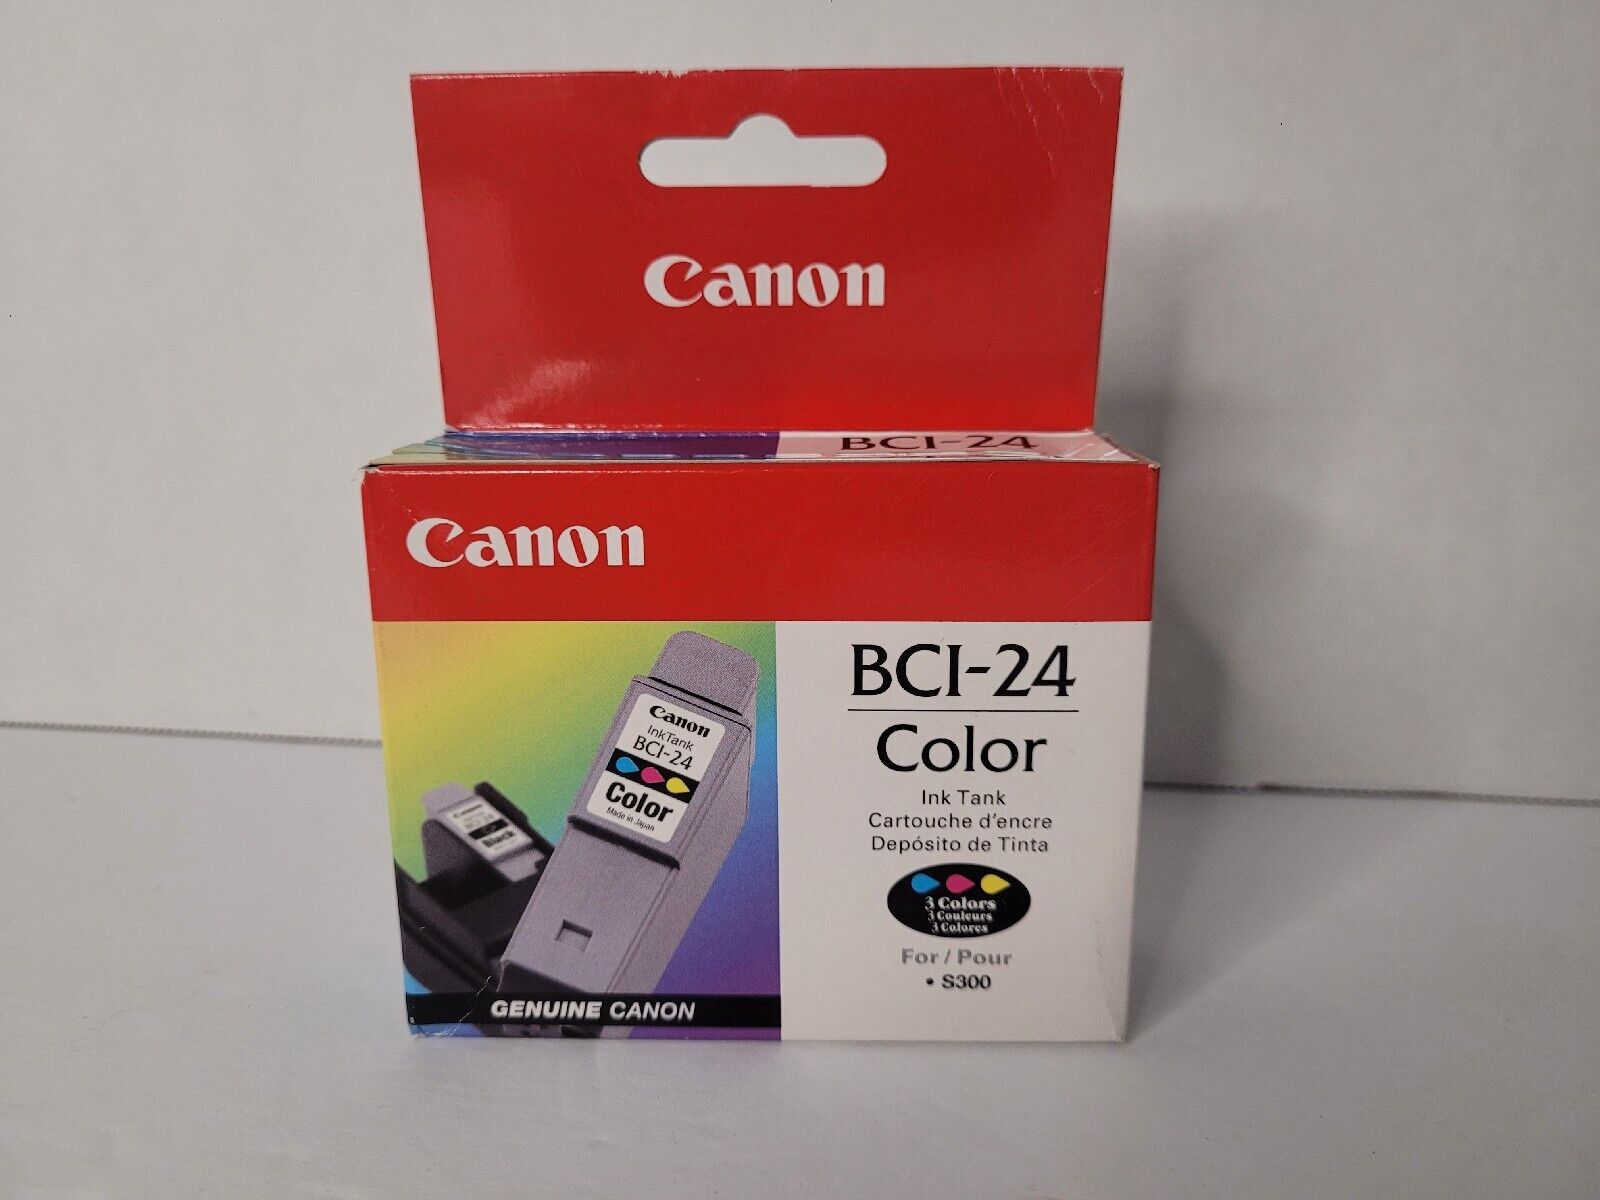 Canon BCI-24 Color Ink Tank Genuine Canon Ink Cartridge